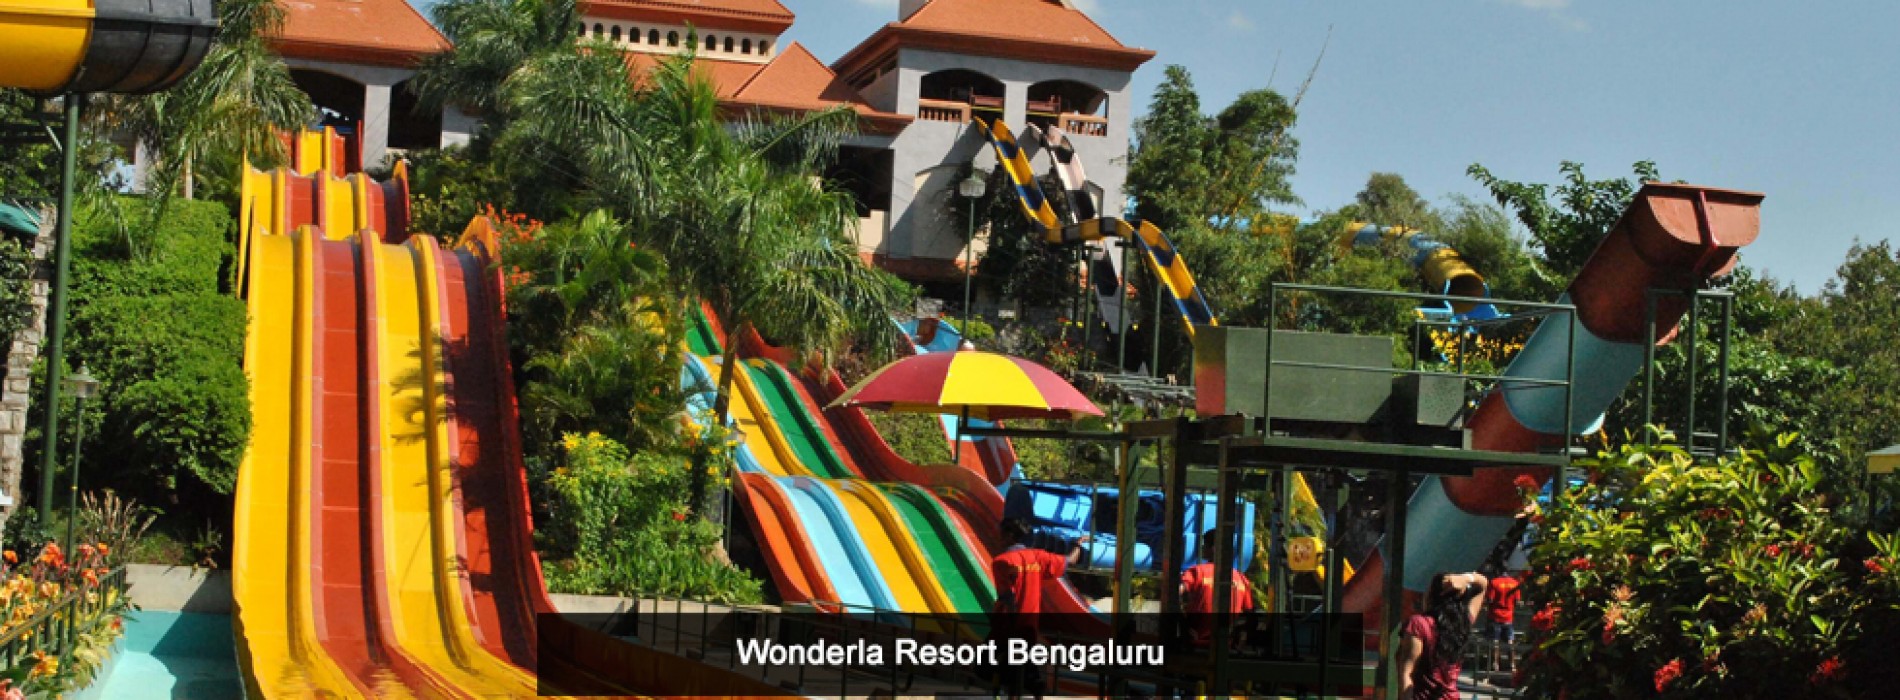 Child-Friendly Holiday Ideas in India